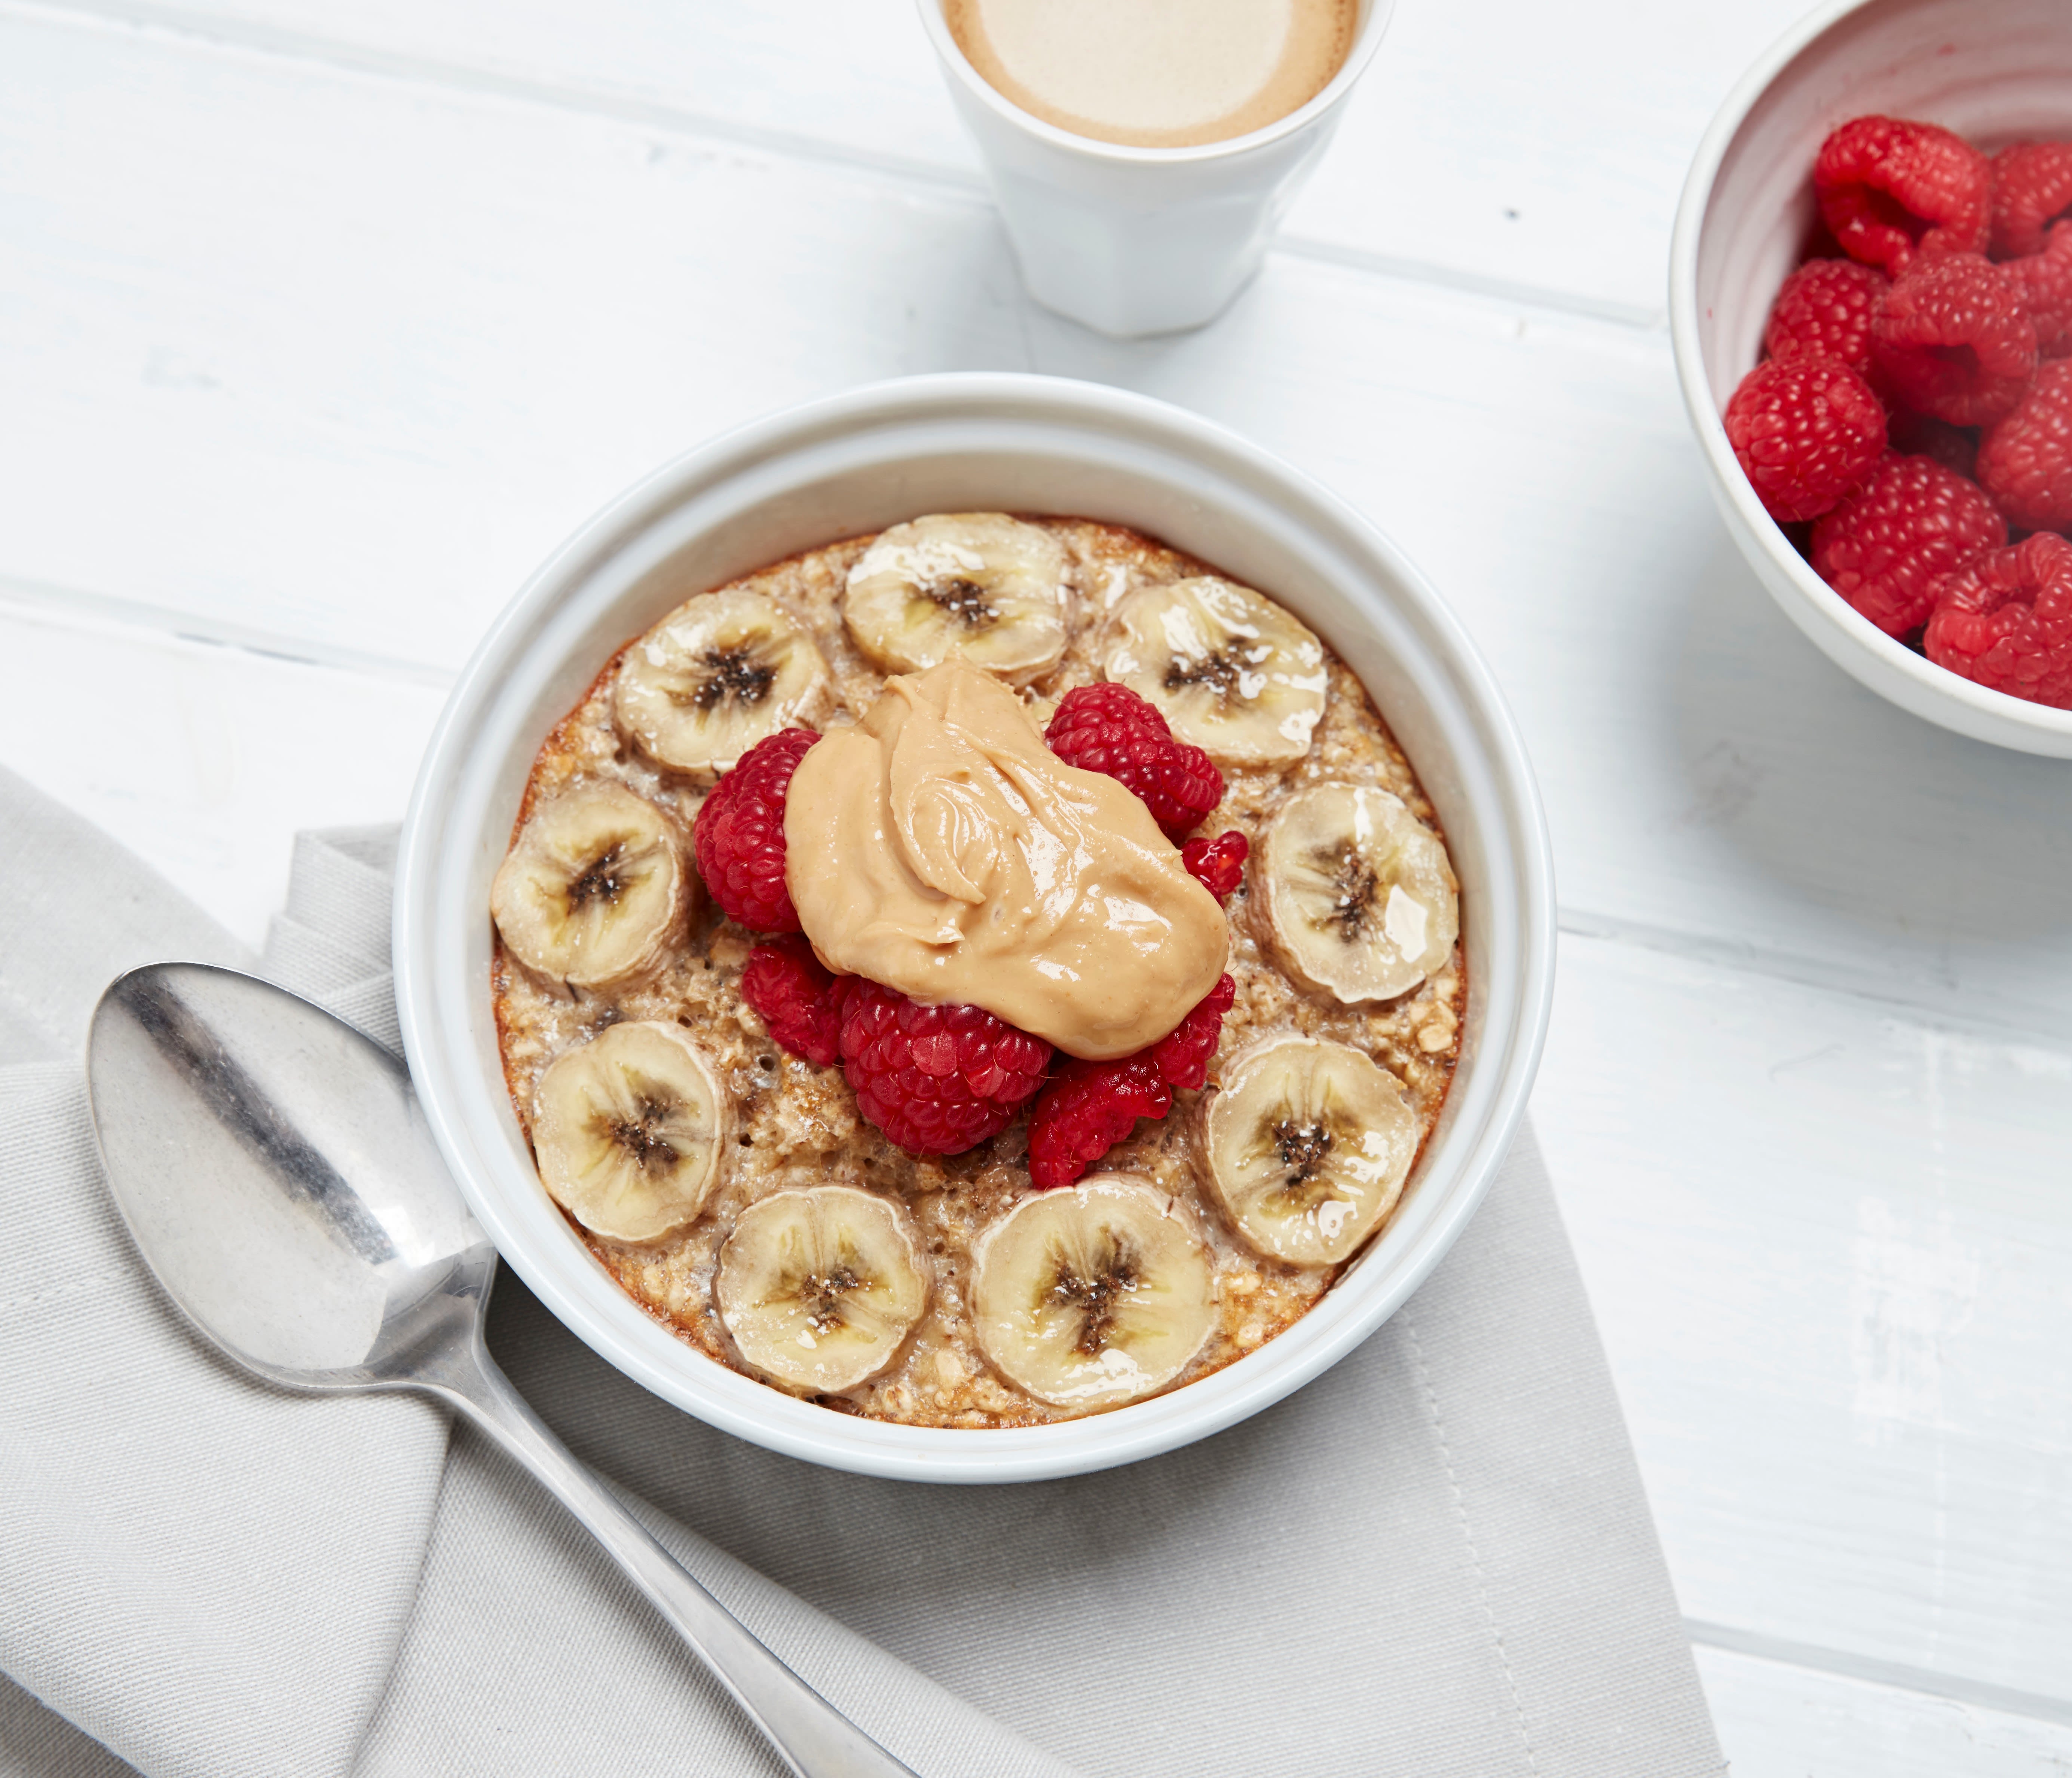 Photo of Banana & peanut butter baked oats by WW